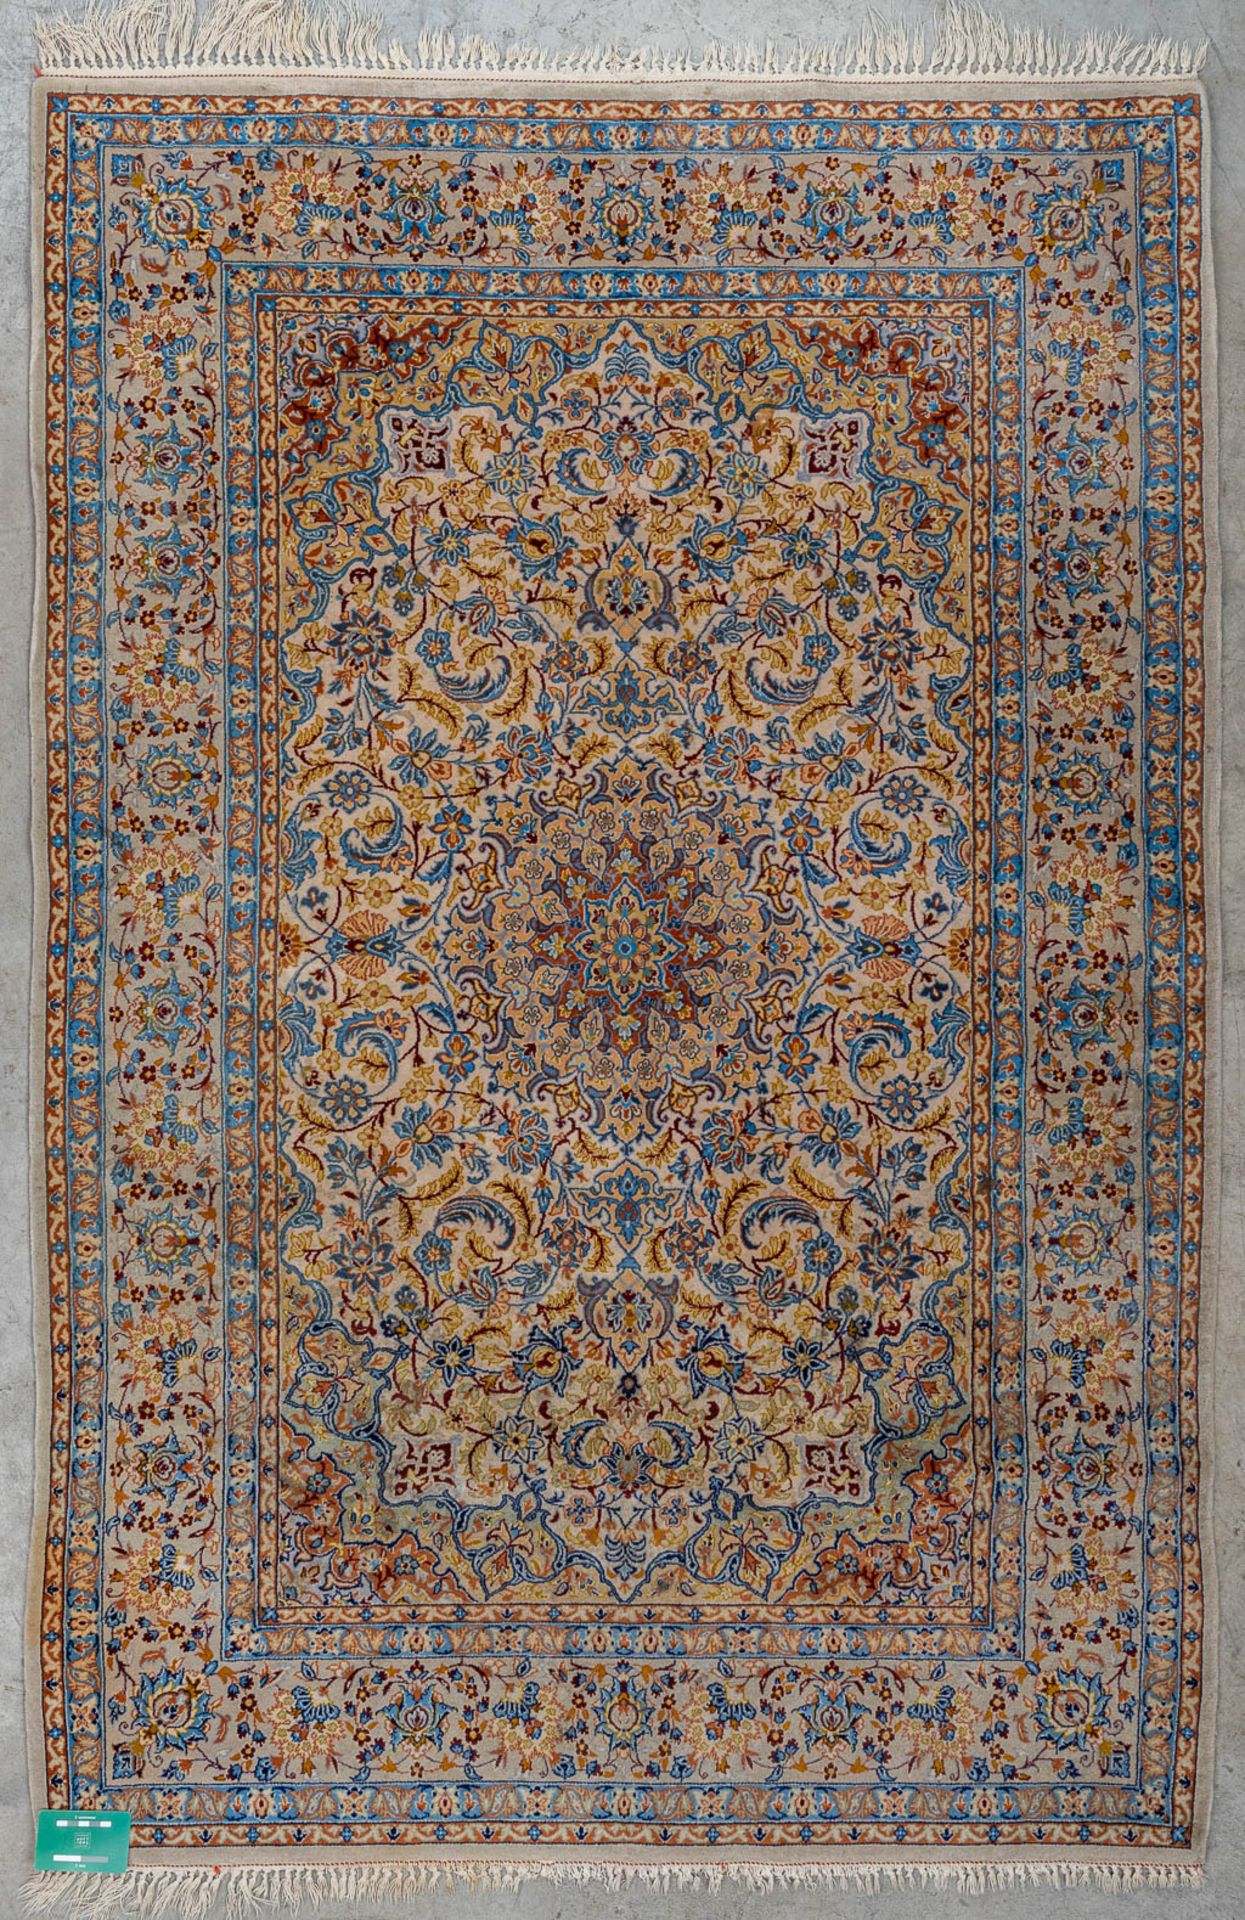 An Oriental hand-made carpet, Najafabad. (168 x 114 cm) - Image 8 of 8